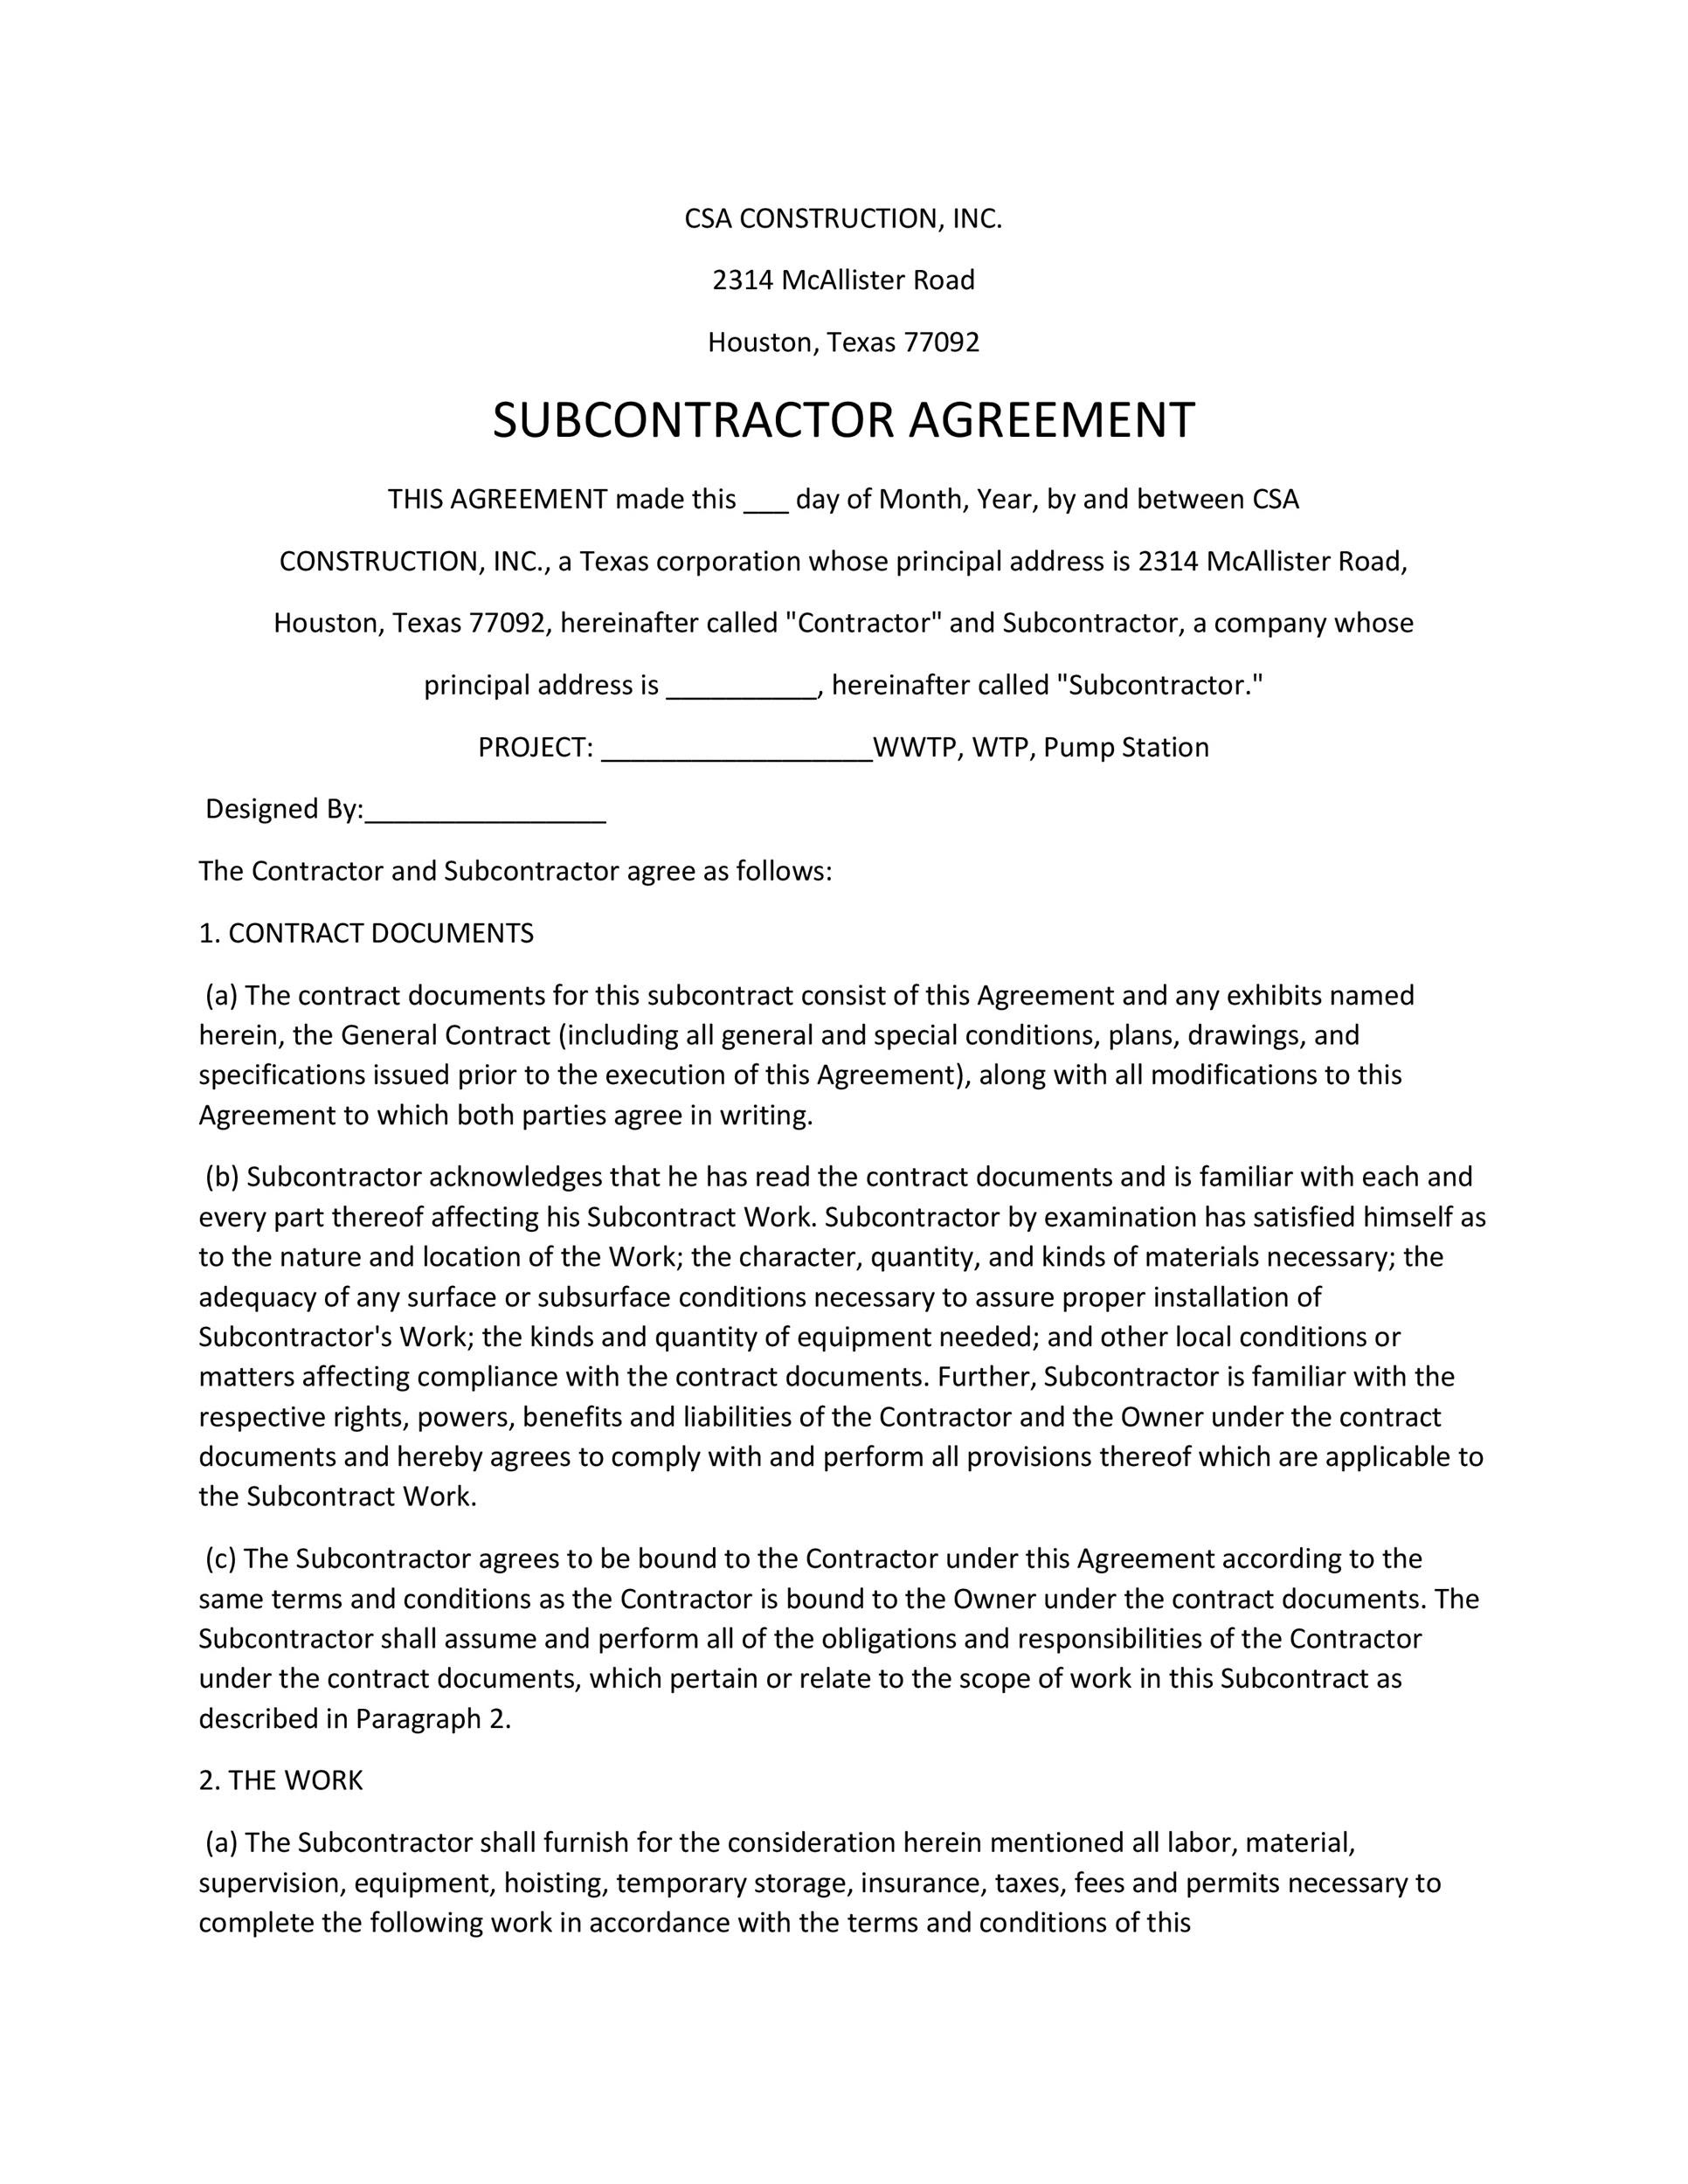 Sample Subcontractor Agreement Malaysia | The Document ...